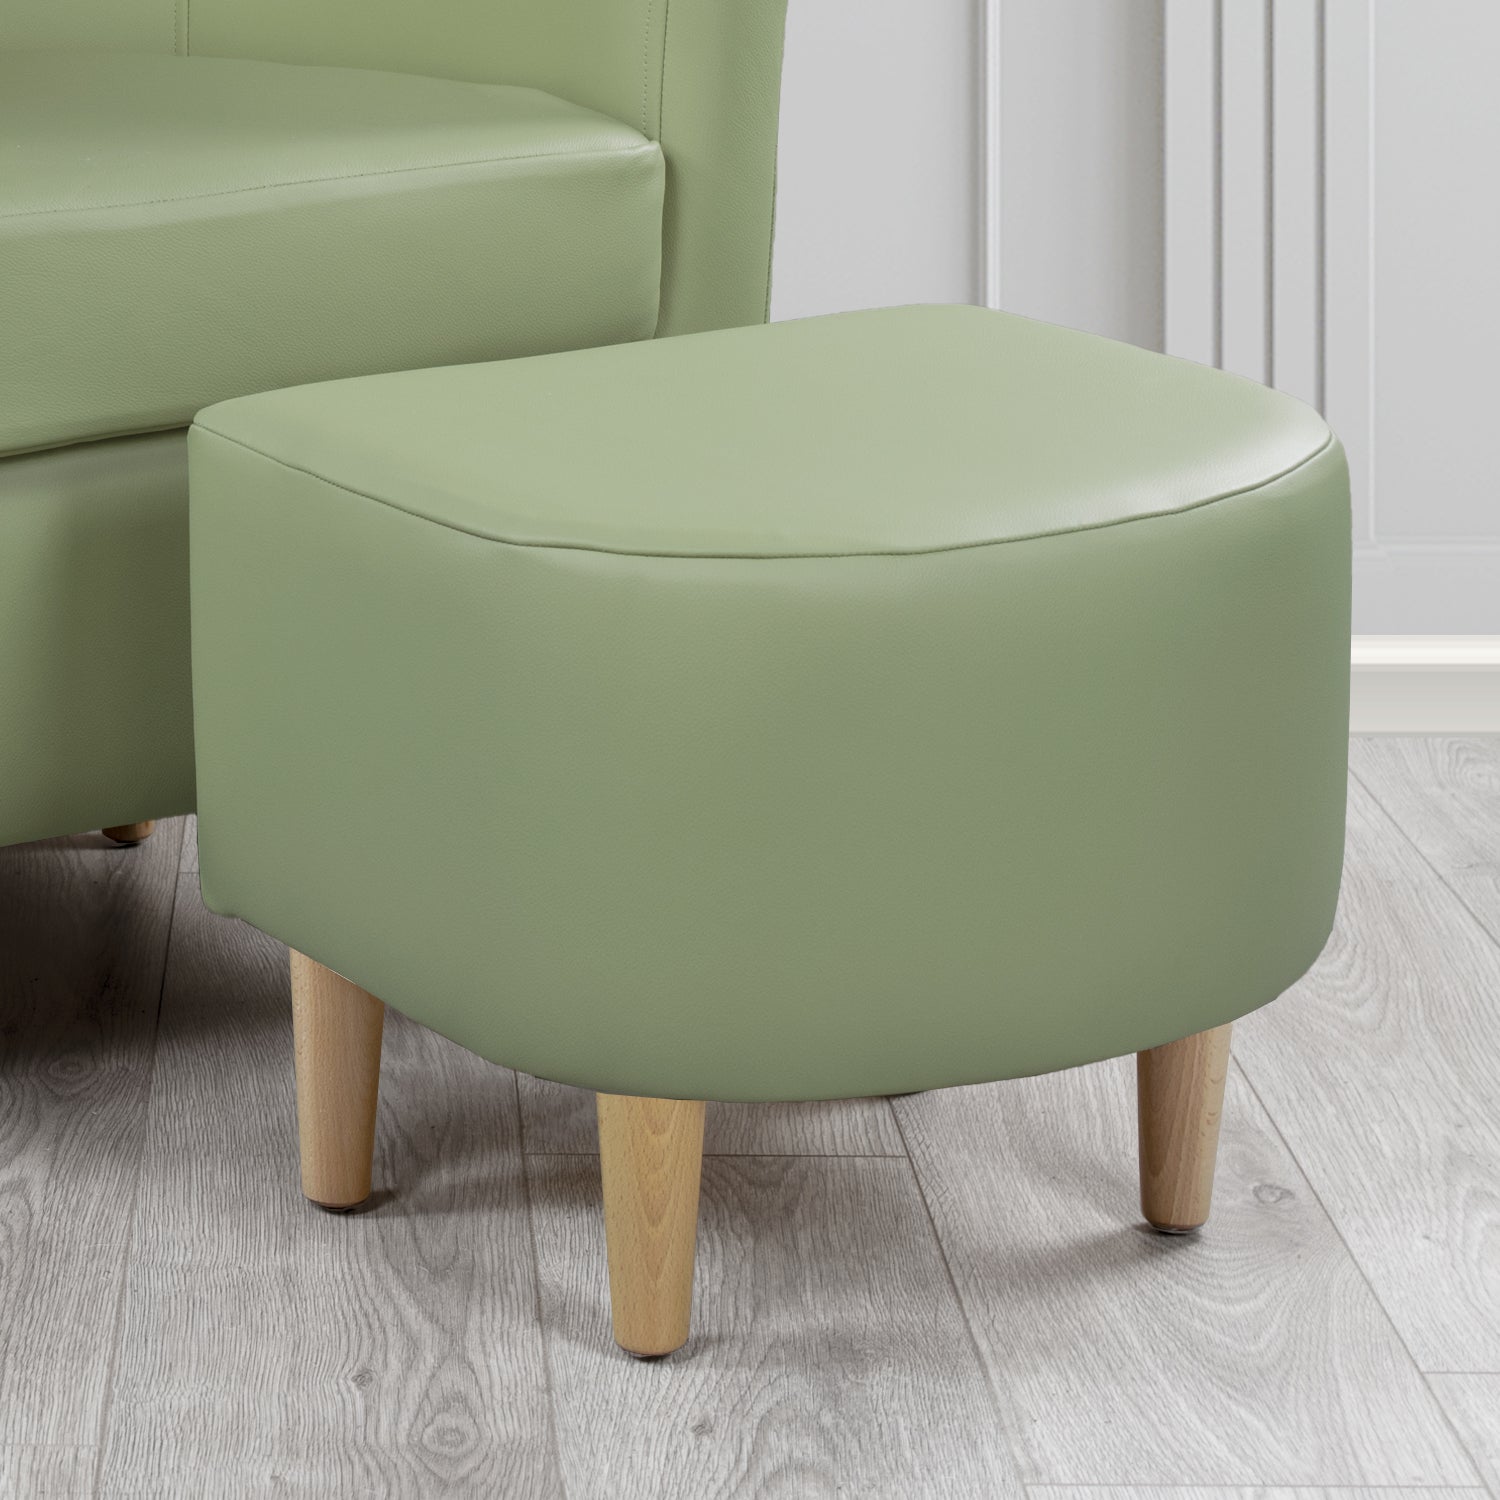 St Tropez Shelly Thyme Green Crib 5 Genuine Leather Footstool (4631438098474)